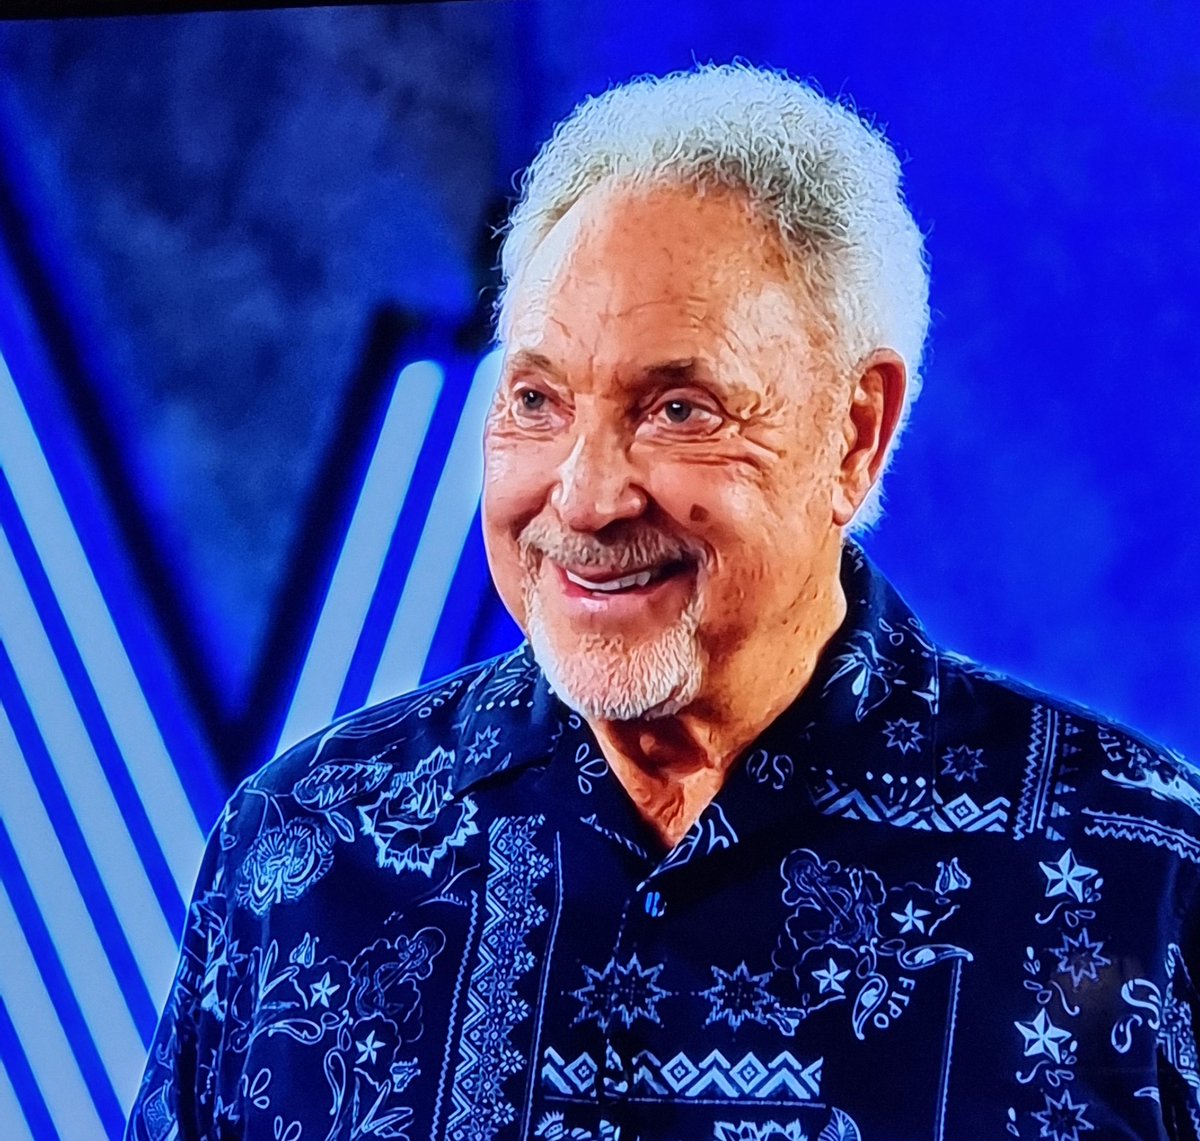 Watching #TheVoiceUK 

Tom Jones is a fucking Legend....
What a voice 

#TomJones